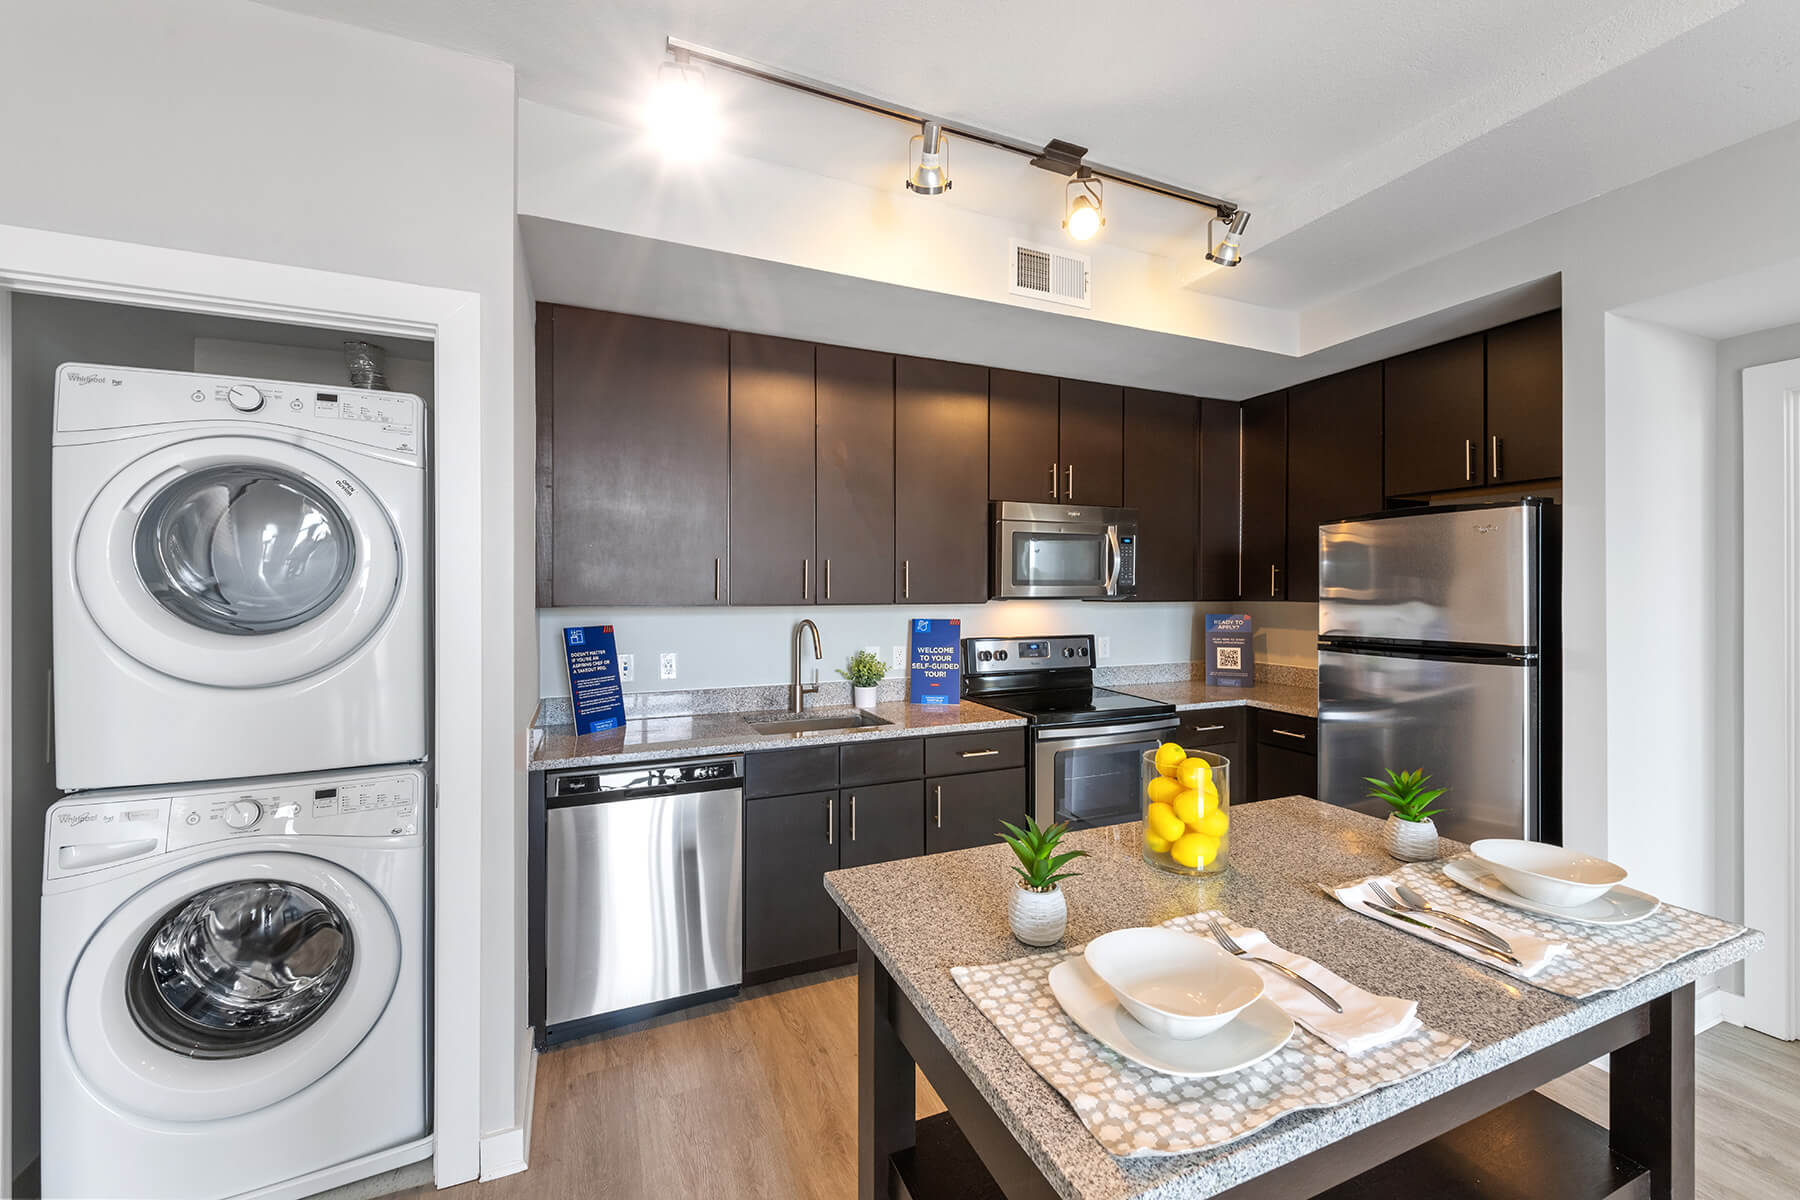 A kitchen with a kitchen island and laundry closet at the Bradley Braddock Road Station Apartments in Alexandria, Virginia.